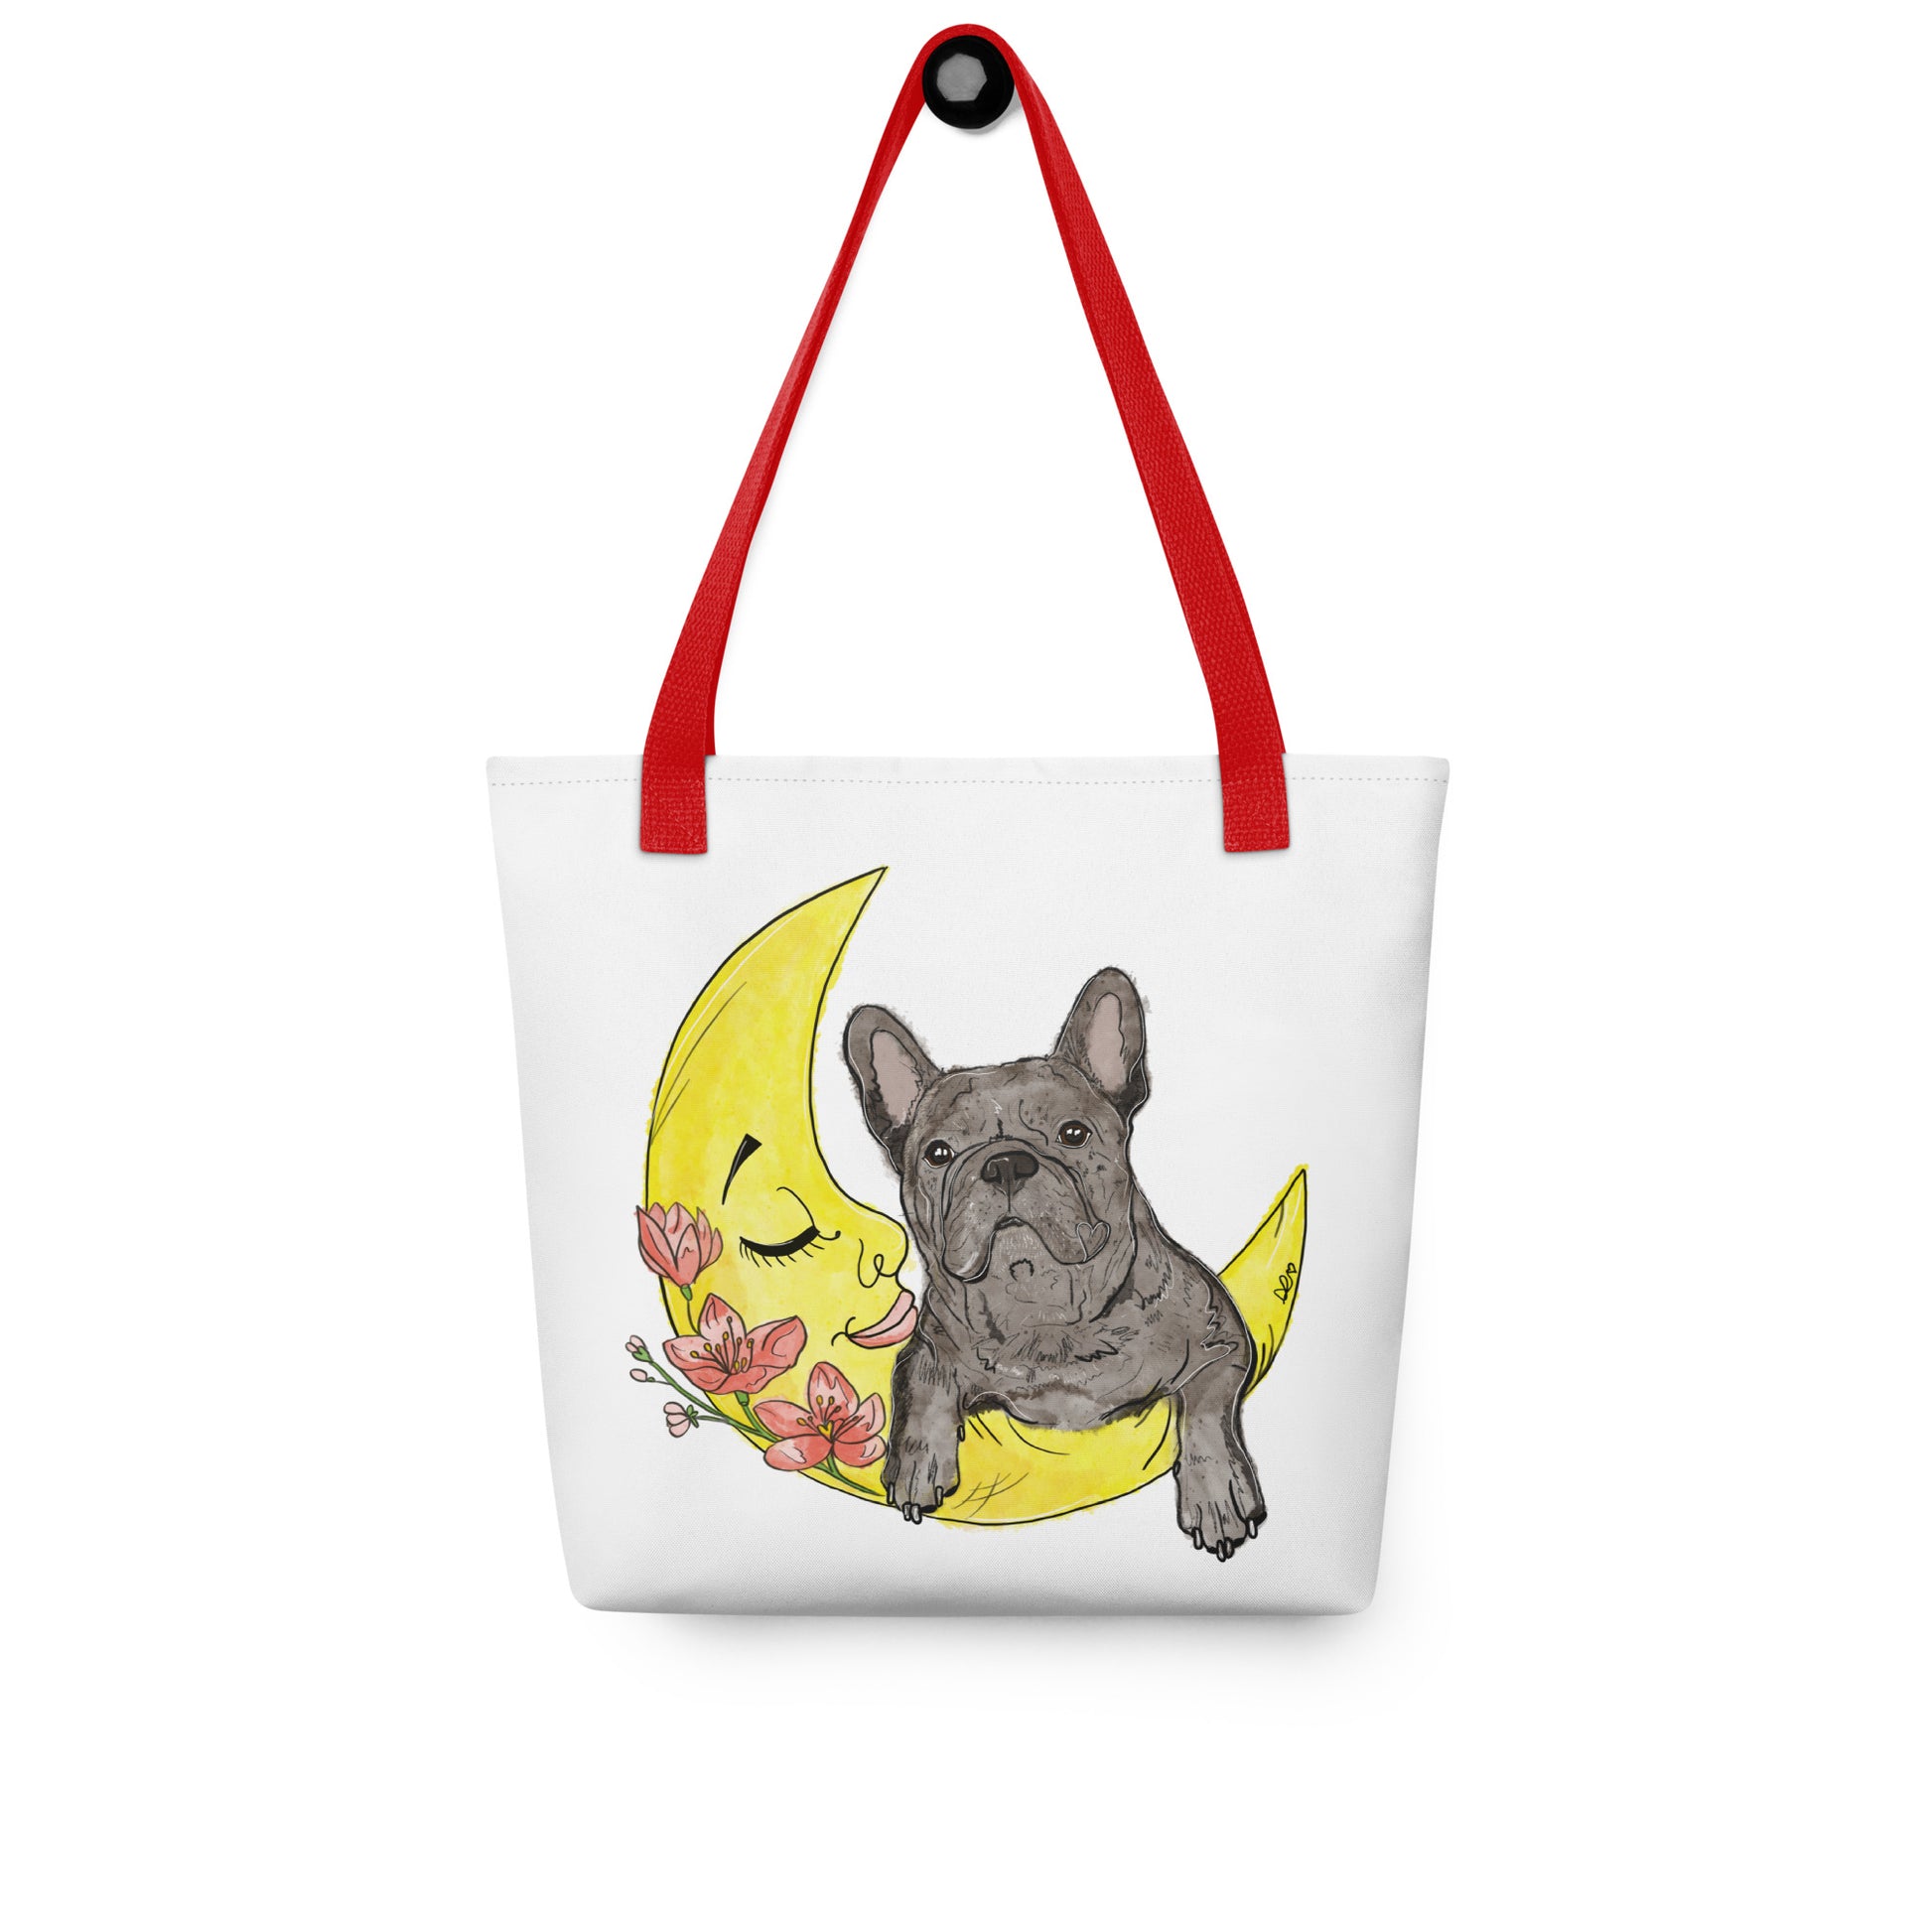 Lorienn Pet Snaps Tasche "love you to the moon and back" mit Frenchie Danny mit roten Griffen